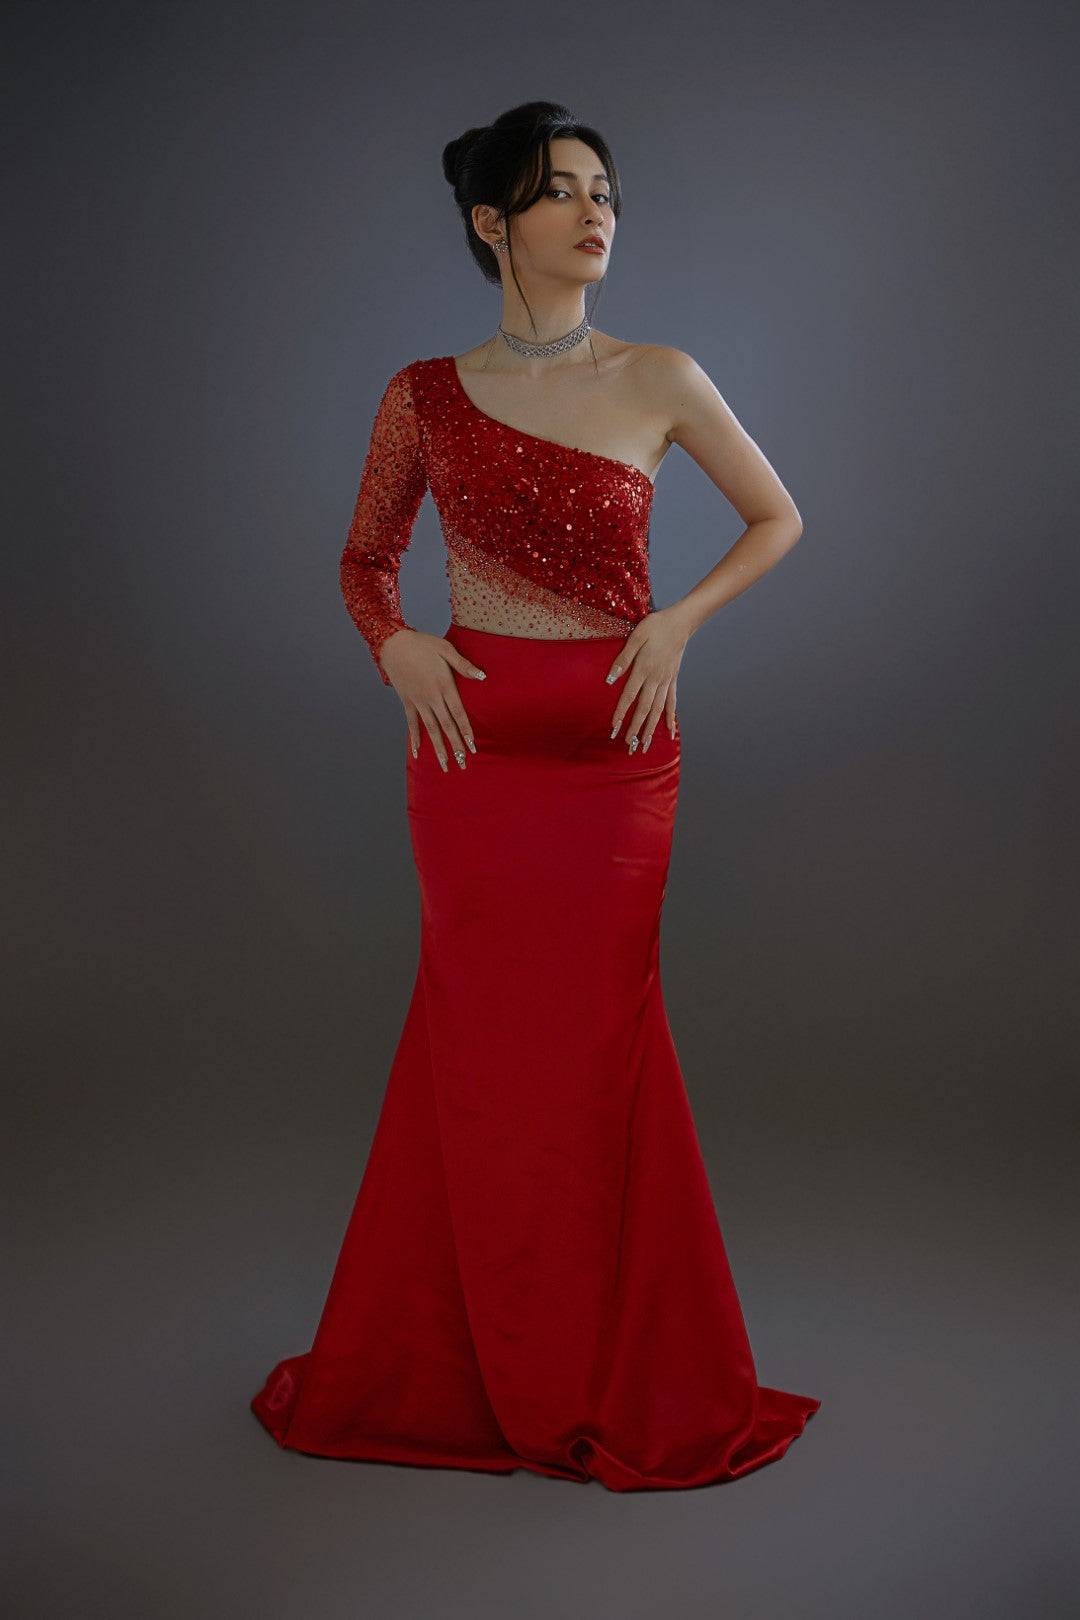 Sultry Sophistication: Sexy and Chic Mermaid Prom Dress